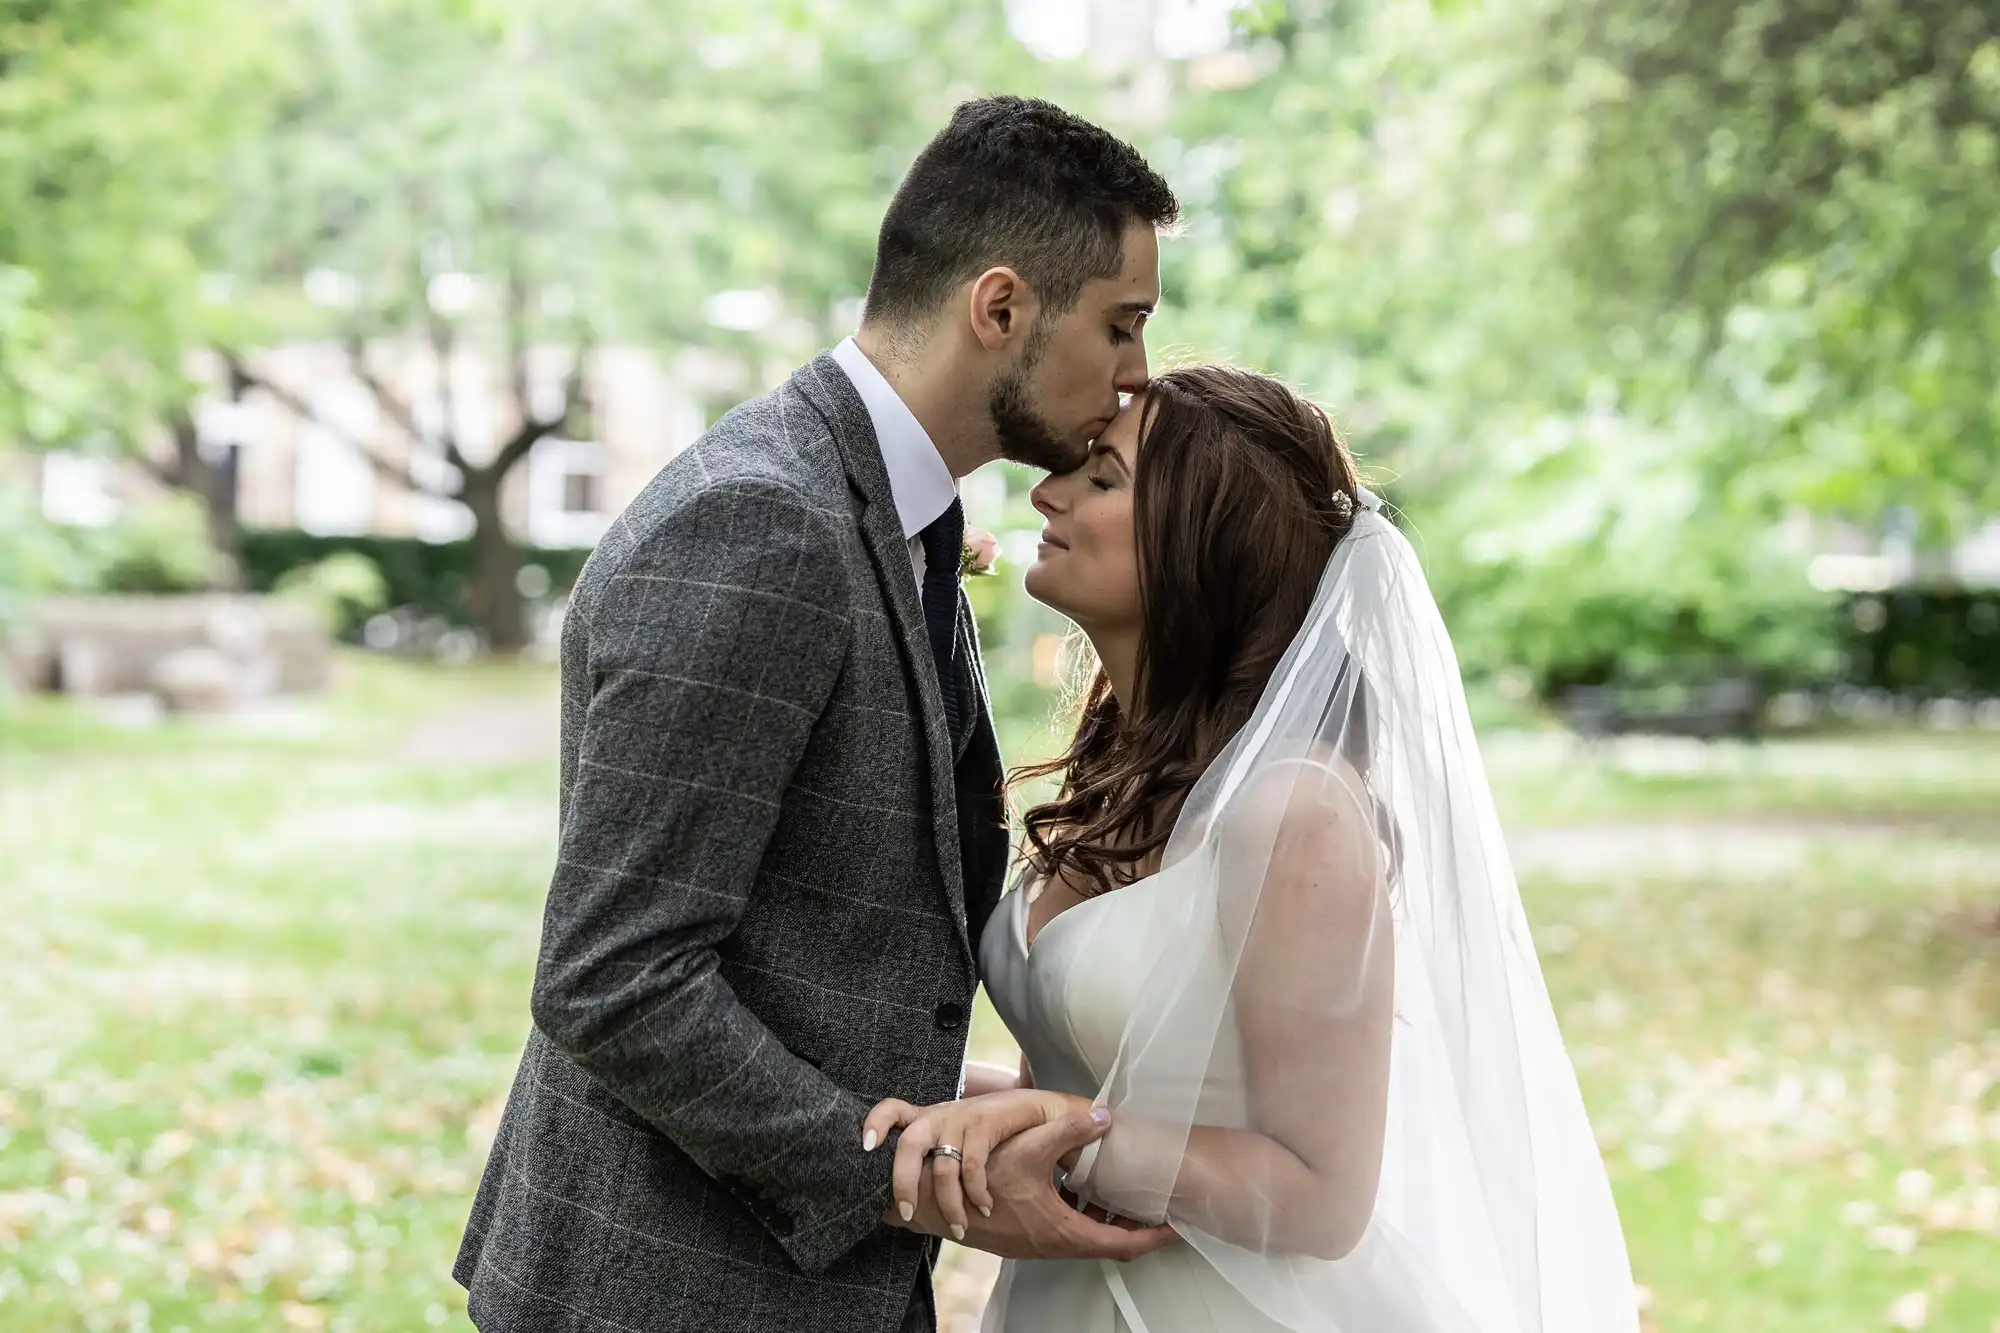 A bride and groom softly touching foreheads in a lush park, both dressed in wedding attire.